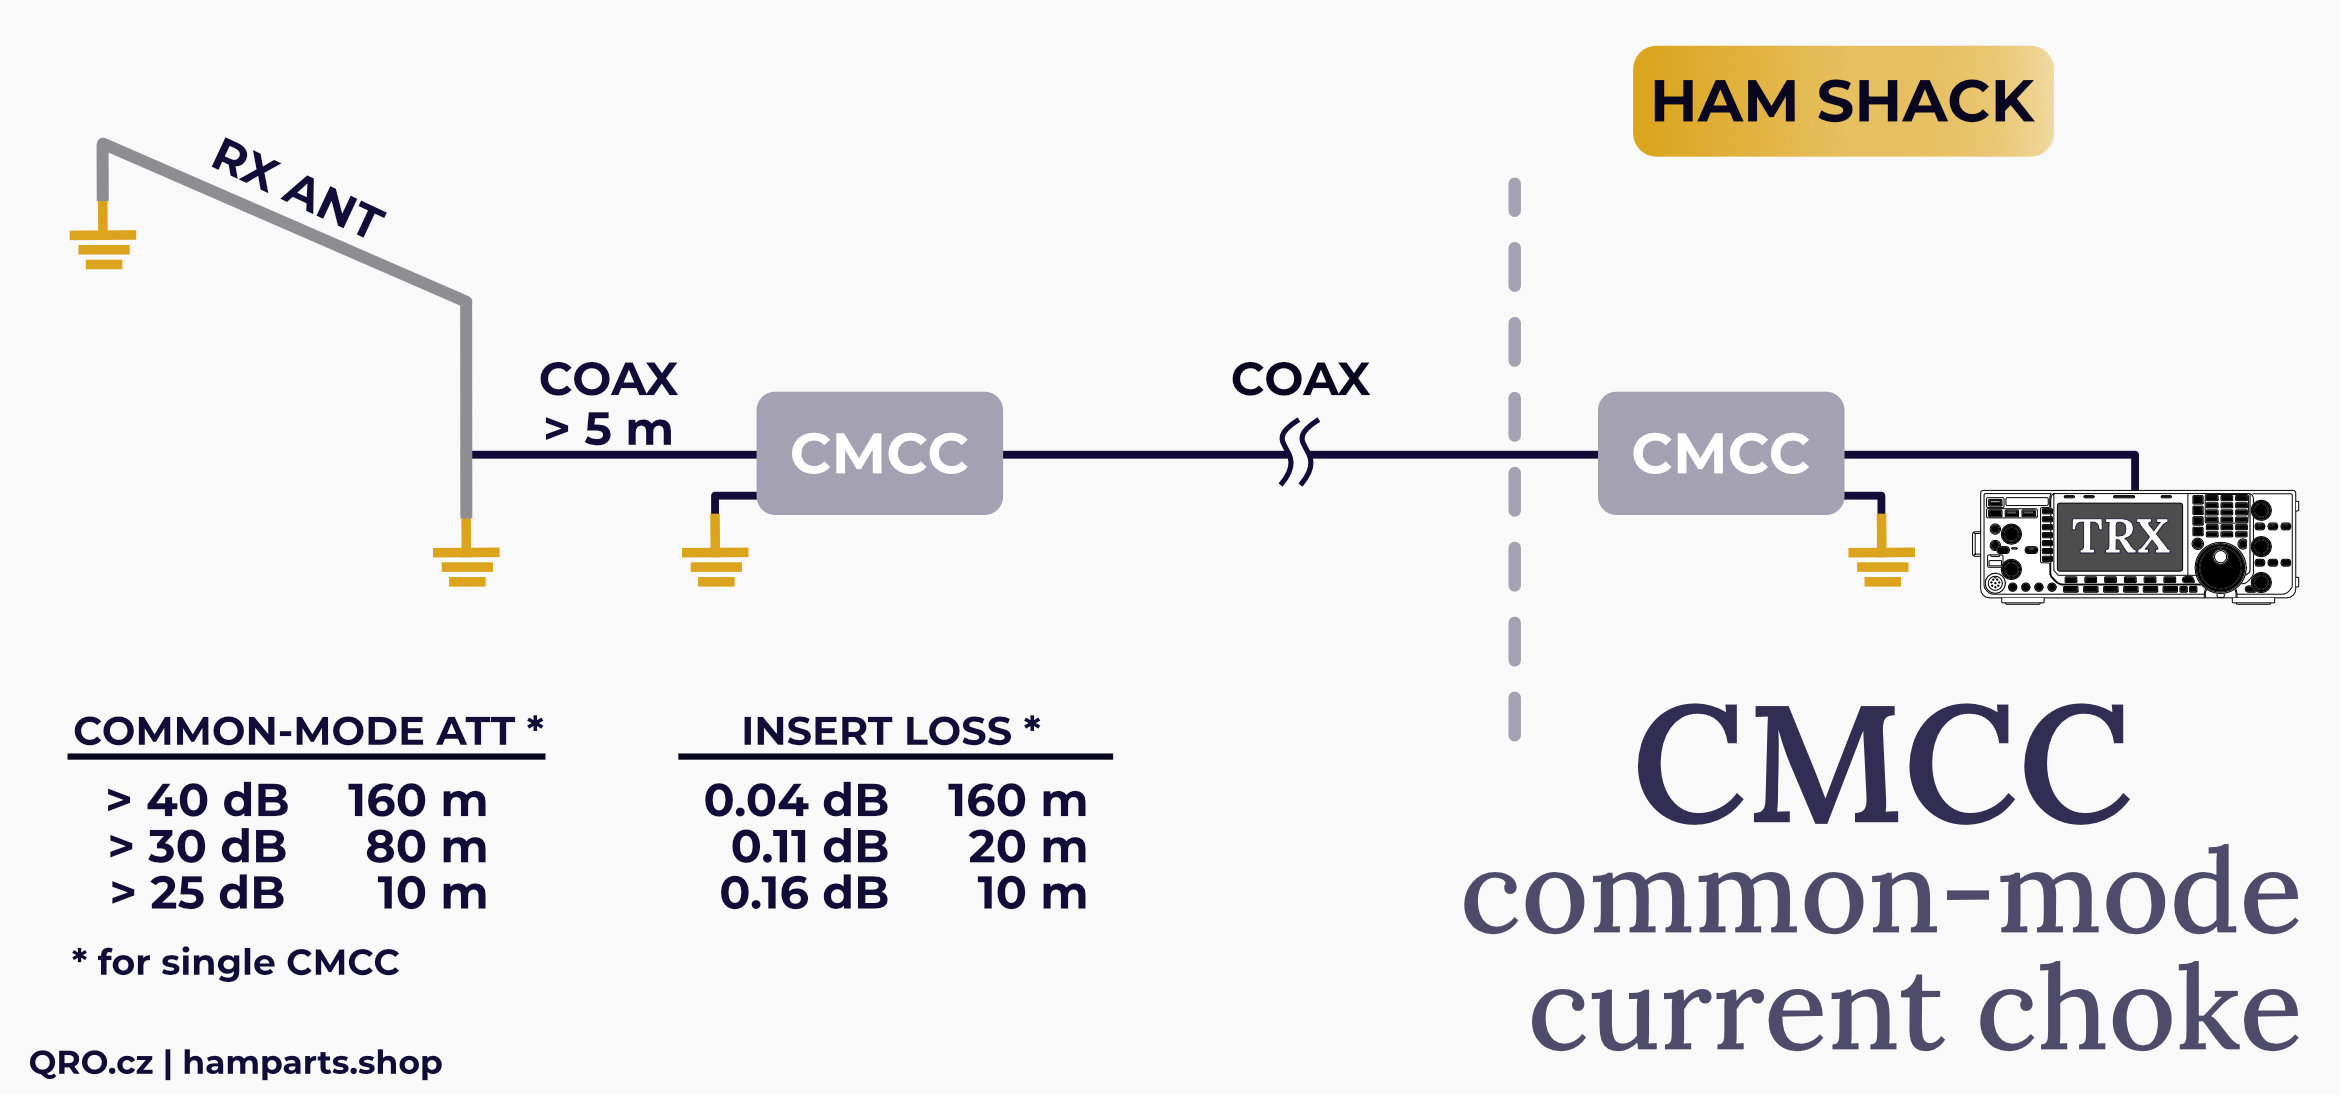 example of installation common-mode current choke cmcc by qro.cz hamparts.shop